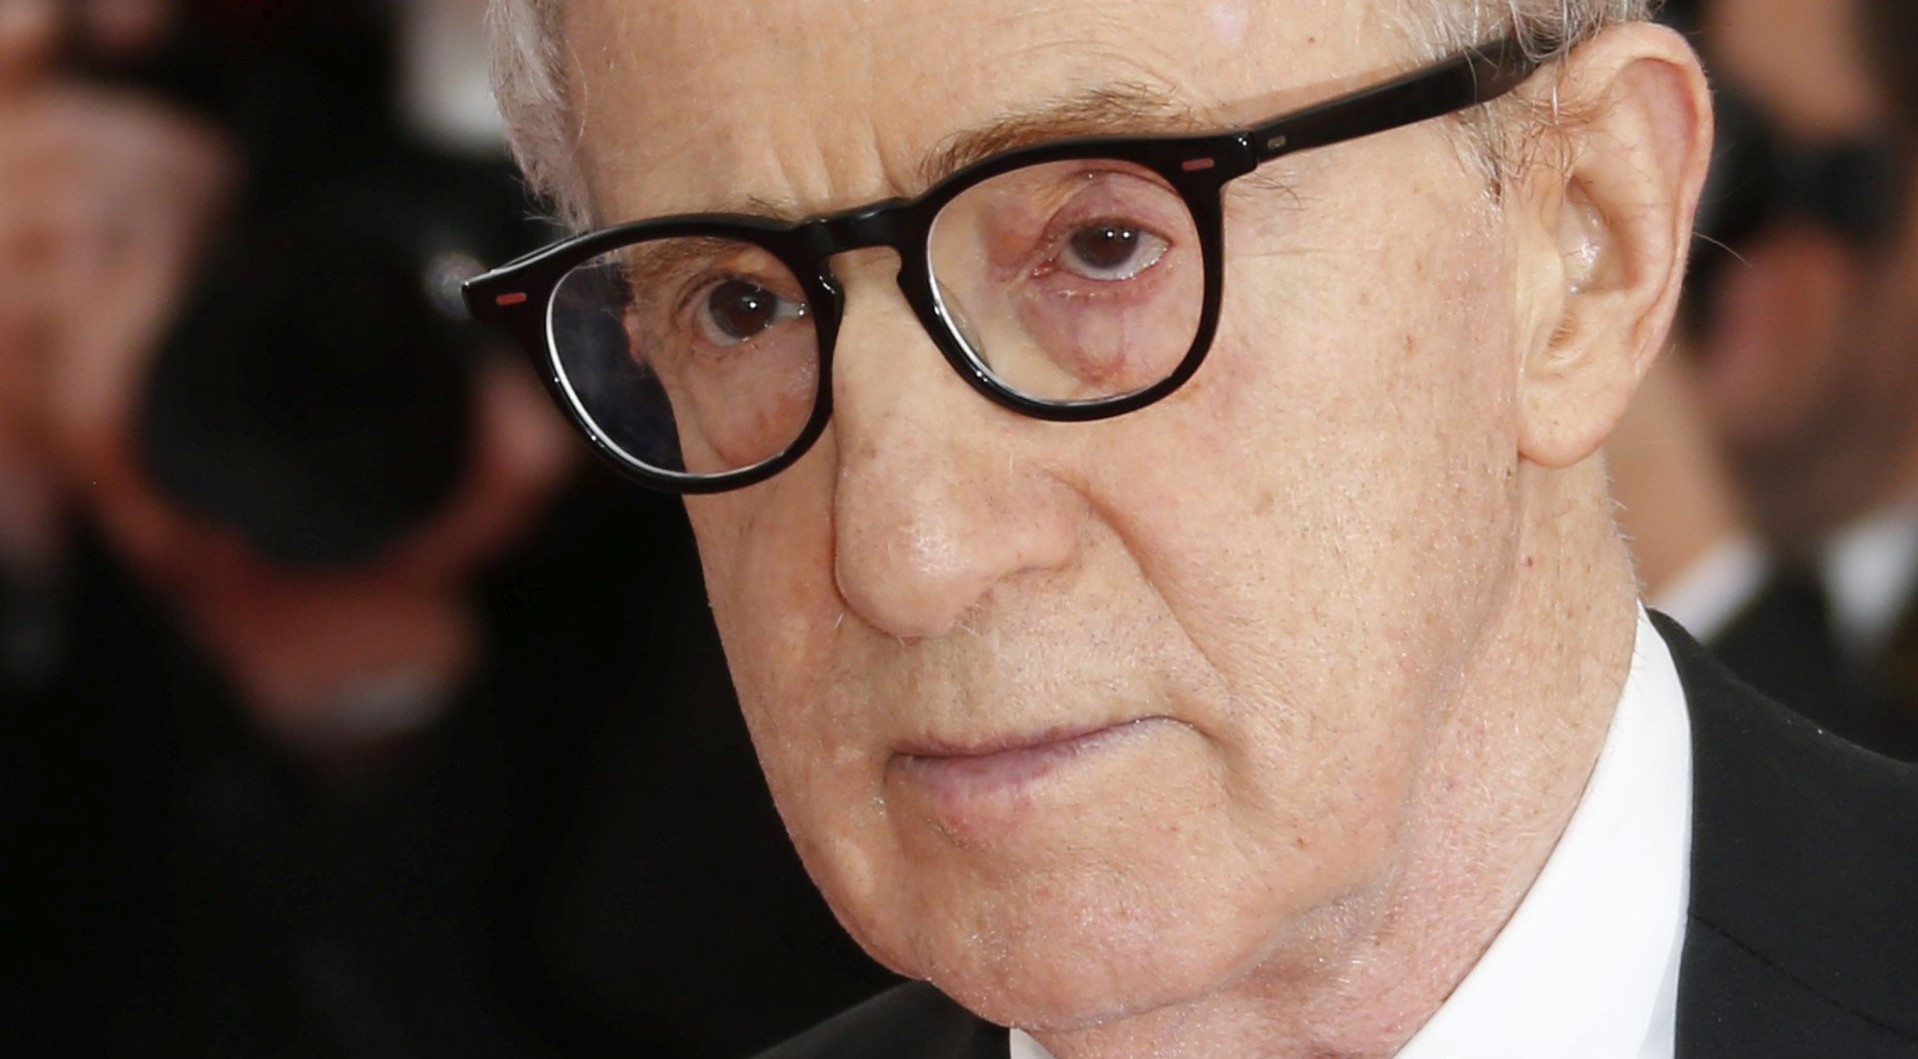 epa05039408 (FILE) A file picture dated 15 May 2015 shows US director Woody Allen arriving for the screening of 'Irrational Man' during the 68th annual Cannes Film Festival, in Cannes, France. Woody Allenwill turn 80 on 01 December 2015.  EPA/GUILLAUME HORCAJUELO